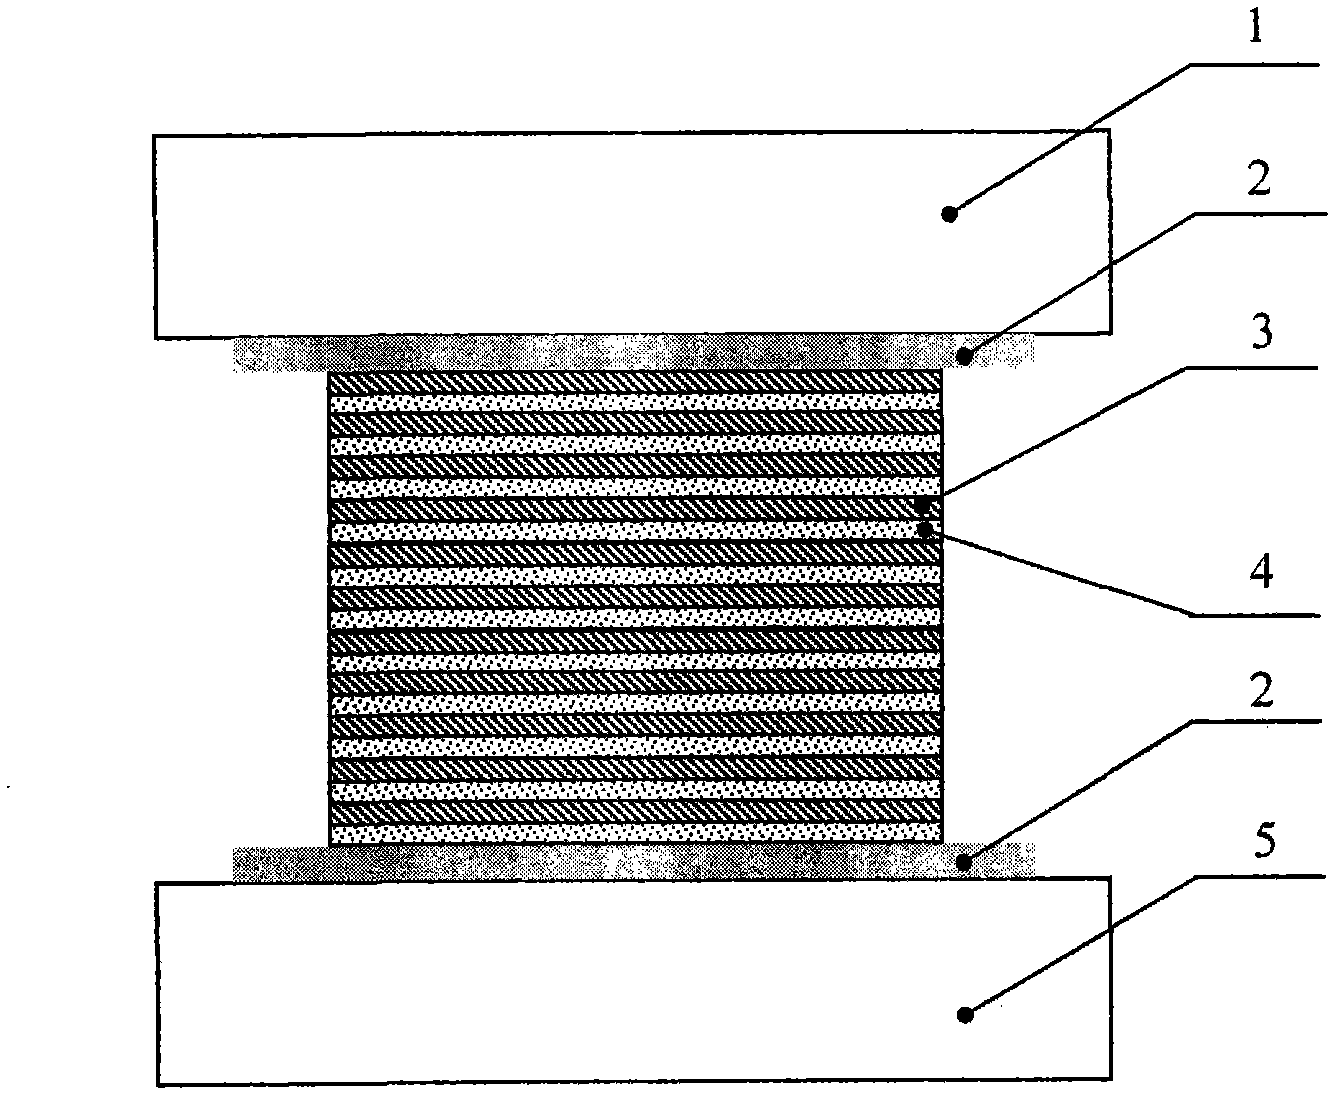 Diffusion welding method of titanium or titanium alloy and stainless steel